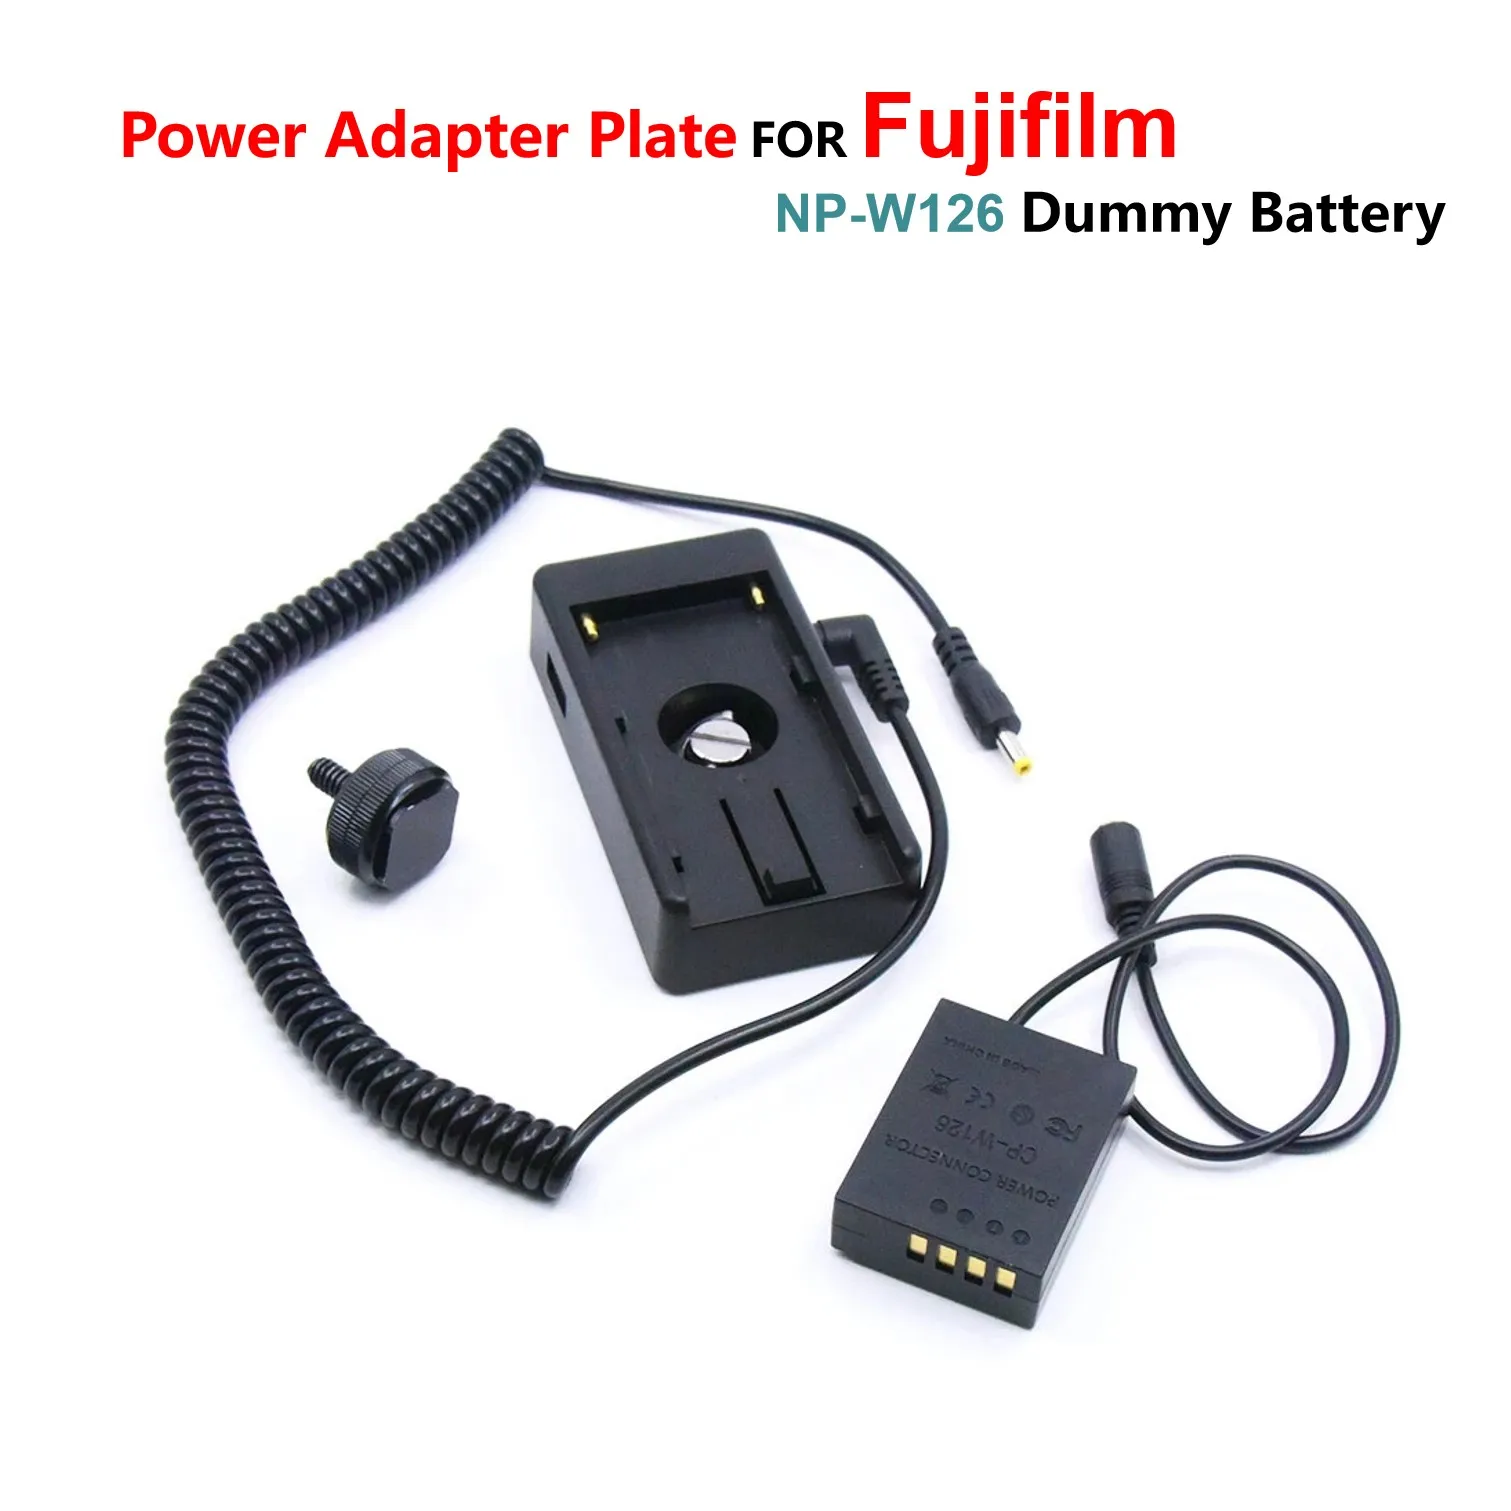 

NP-W126s Fake Battery + NP F730 F570 F990 F980 Power Adapter Plate For Fujifilm X-E2S X-H1 M1 X-T1 T2 T3 X-T10 T20 T30 T100 T200